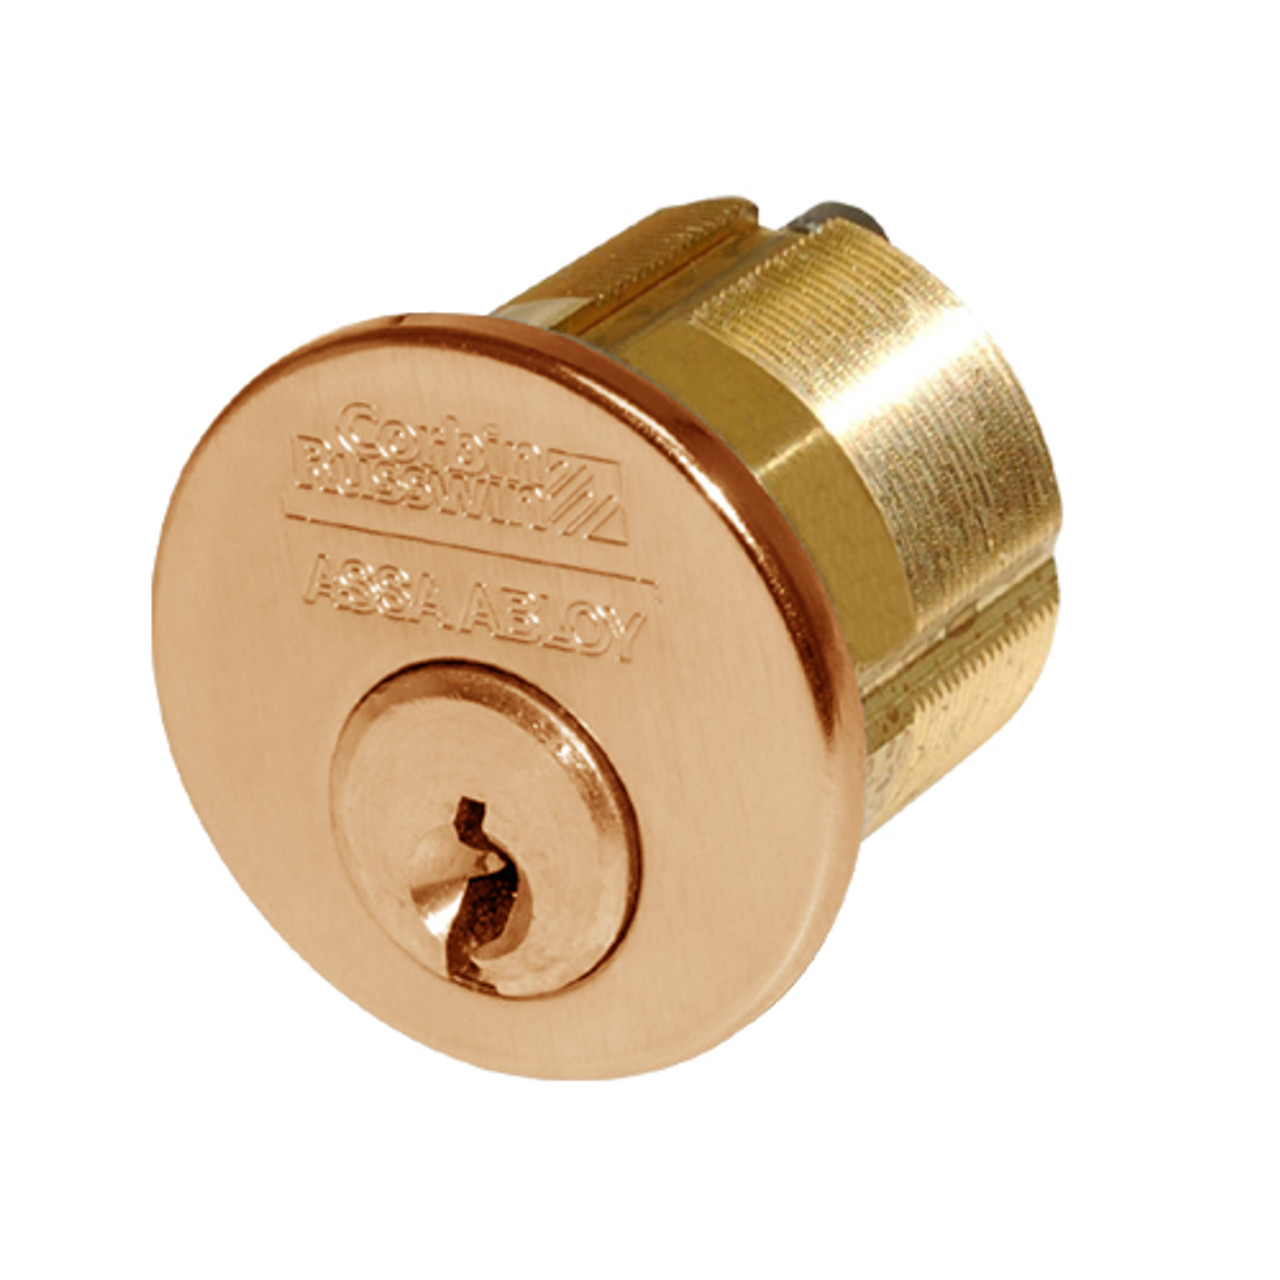 CR1000-118-A01-6-D1-612 Corbin Conventional Mortise Cylinder for Mortise Lock and DL3000 Deadlocks with Cloverleaf Cam in Satin Bronze Finish